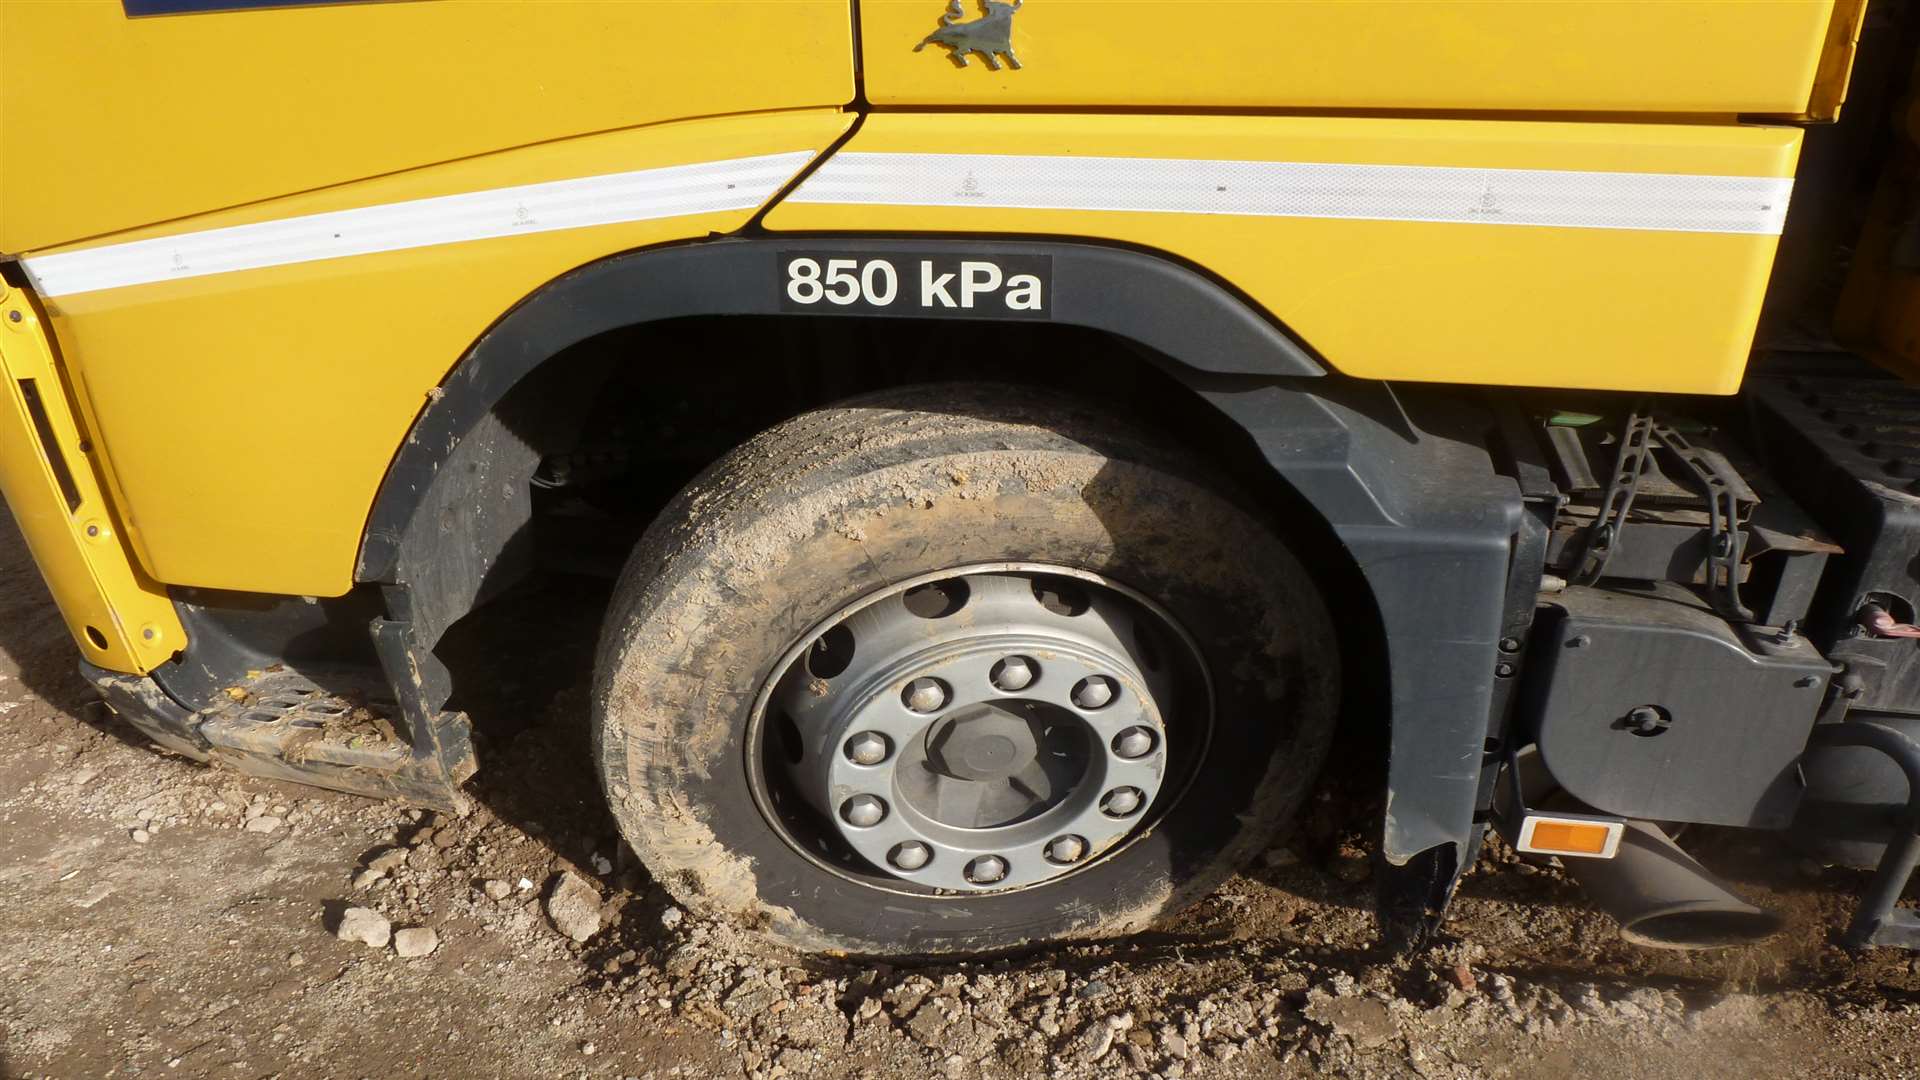 A front wheel of the Waberer's International lorry stuck in mud